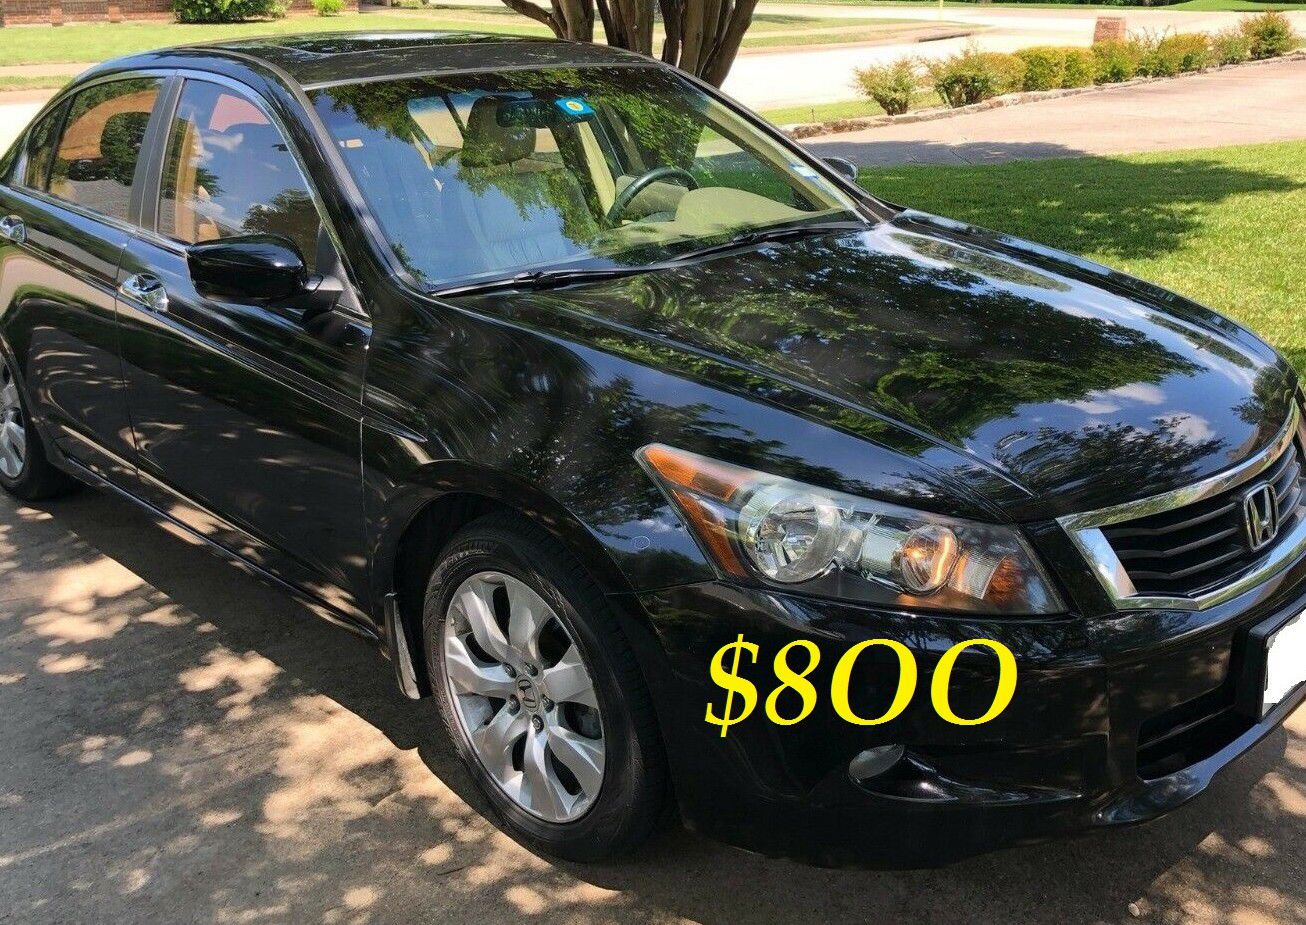 💝💝$8OO For Sale is my 2OO9 Honda Accord Clean tittle! Comfortable fully loaded.💝🔑